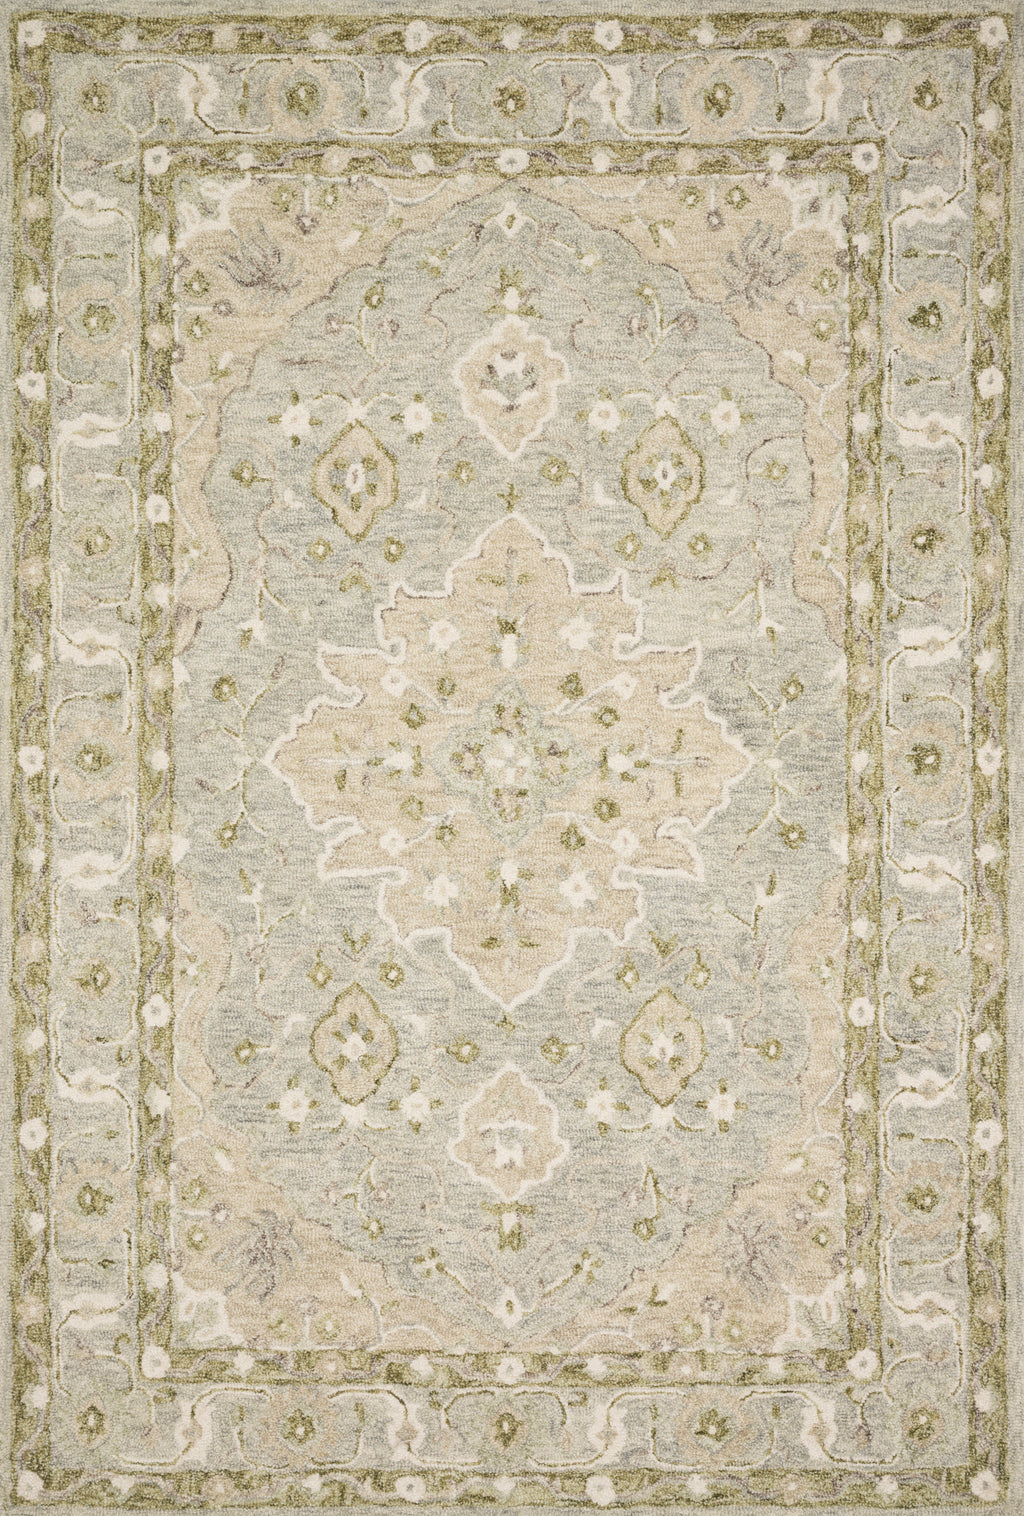 RYELAND Collection Wool Rug  in  GREY / SAGE Gray Accent Hand-Hooked Wool